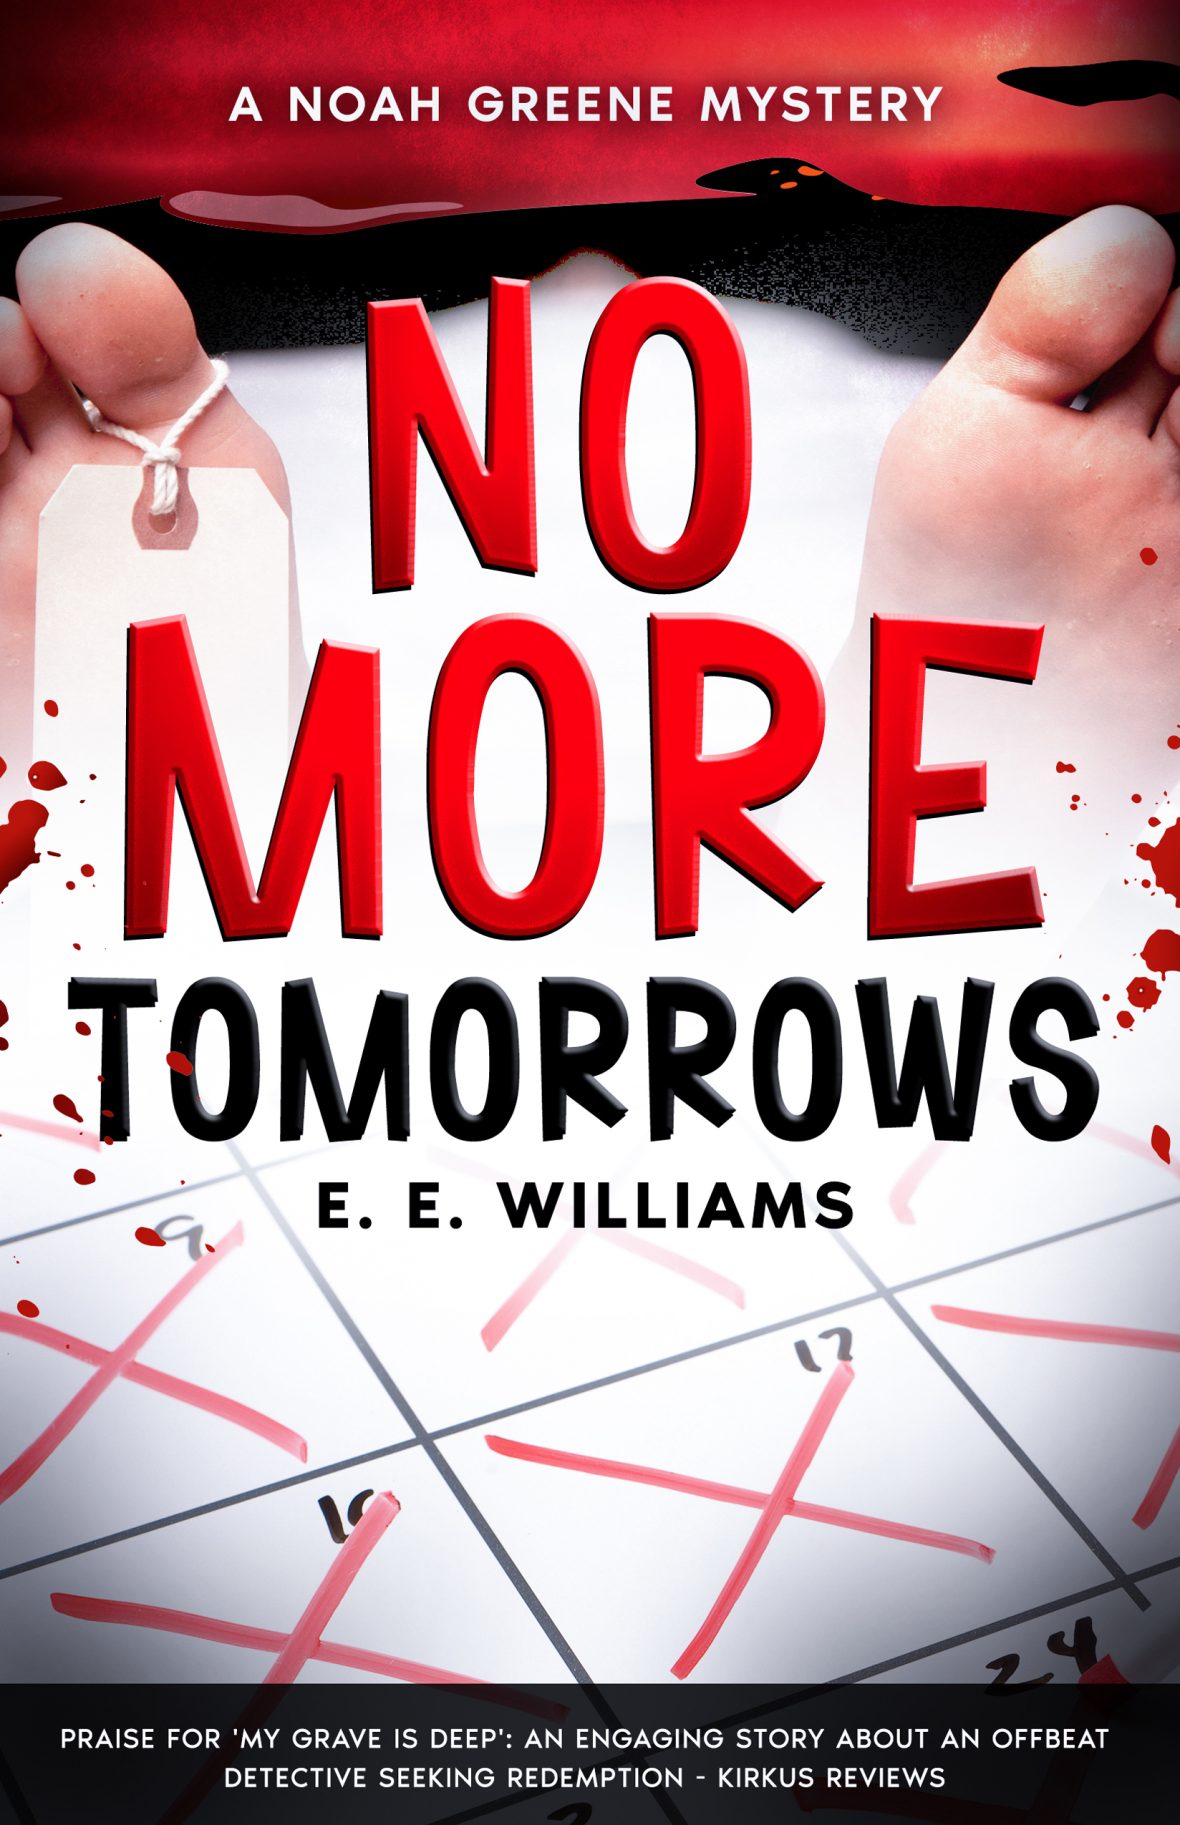 The new pulse-pounding mystery from E.E. Williams will be available Oct. 7 from Moonshine Cove Publishing